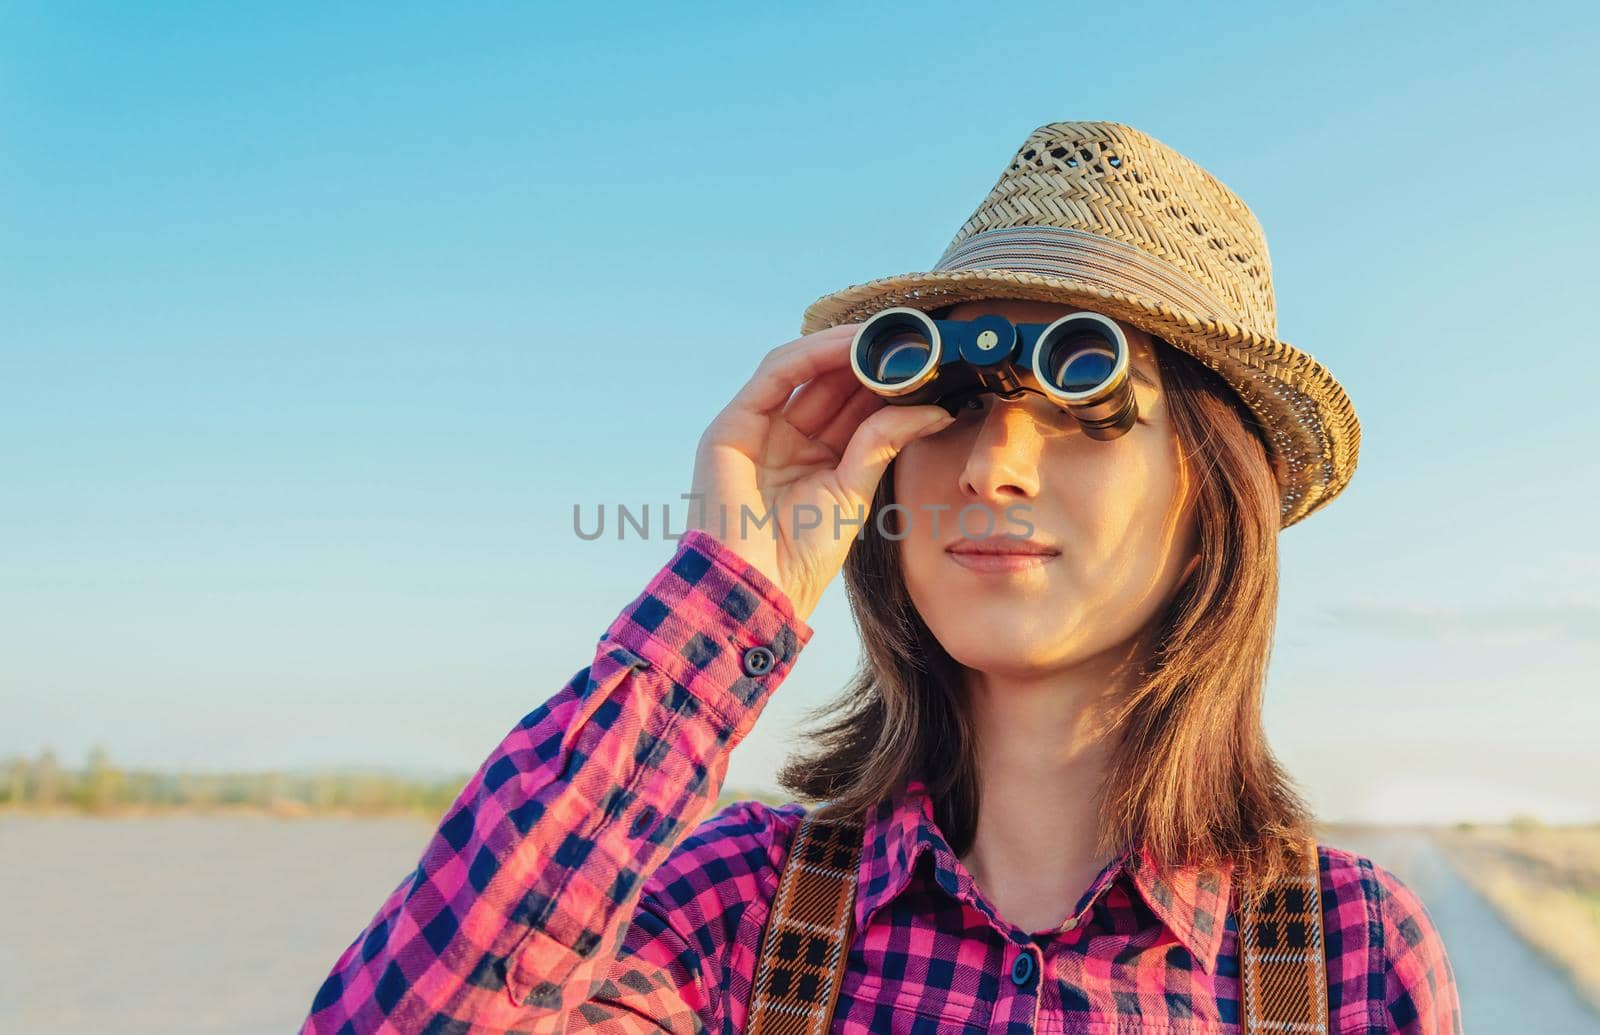 Traveler young woman looking through binoculars outdoor. Space for text in left part of image